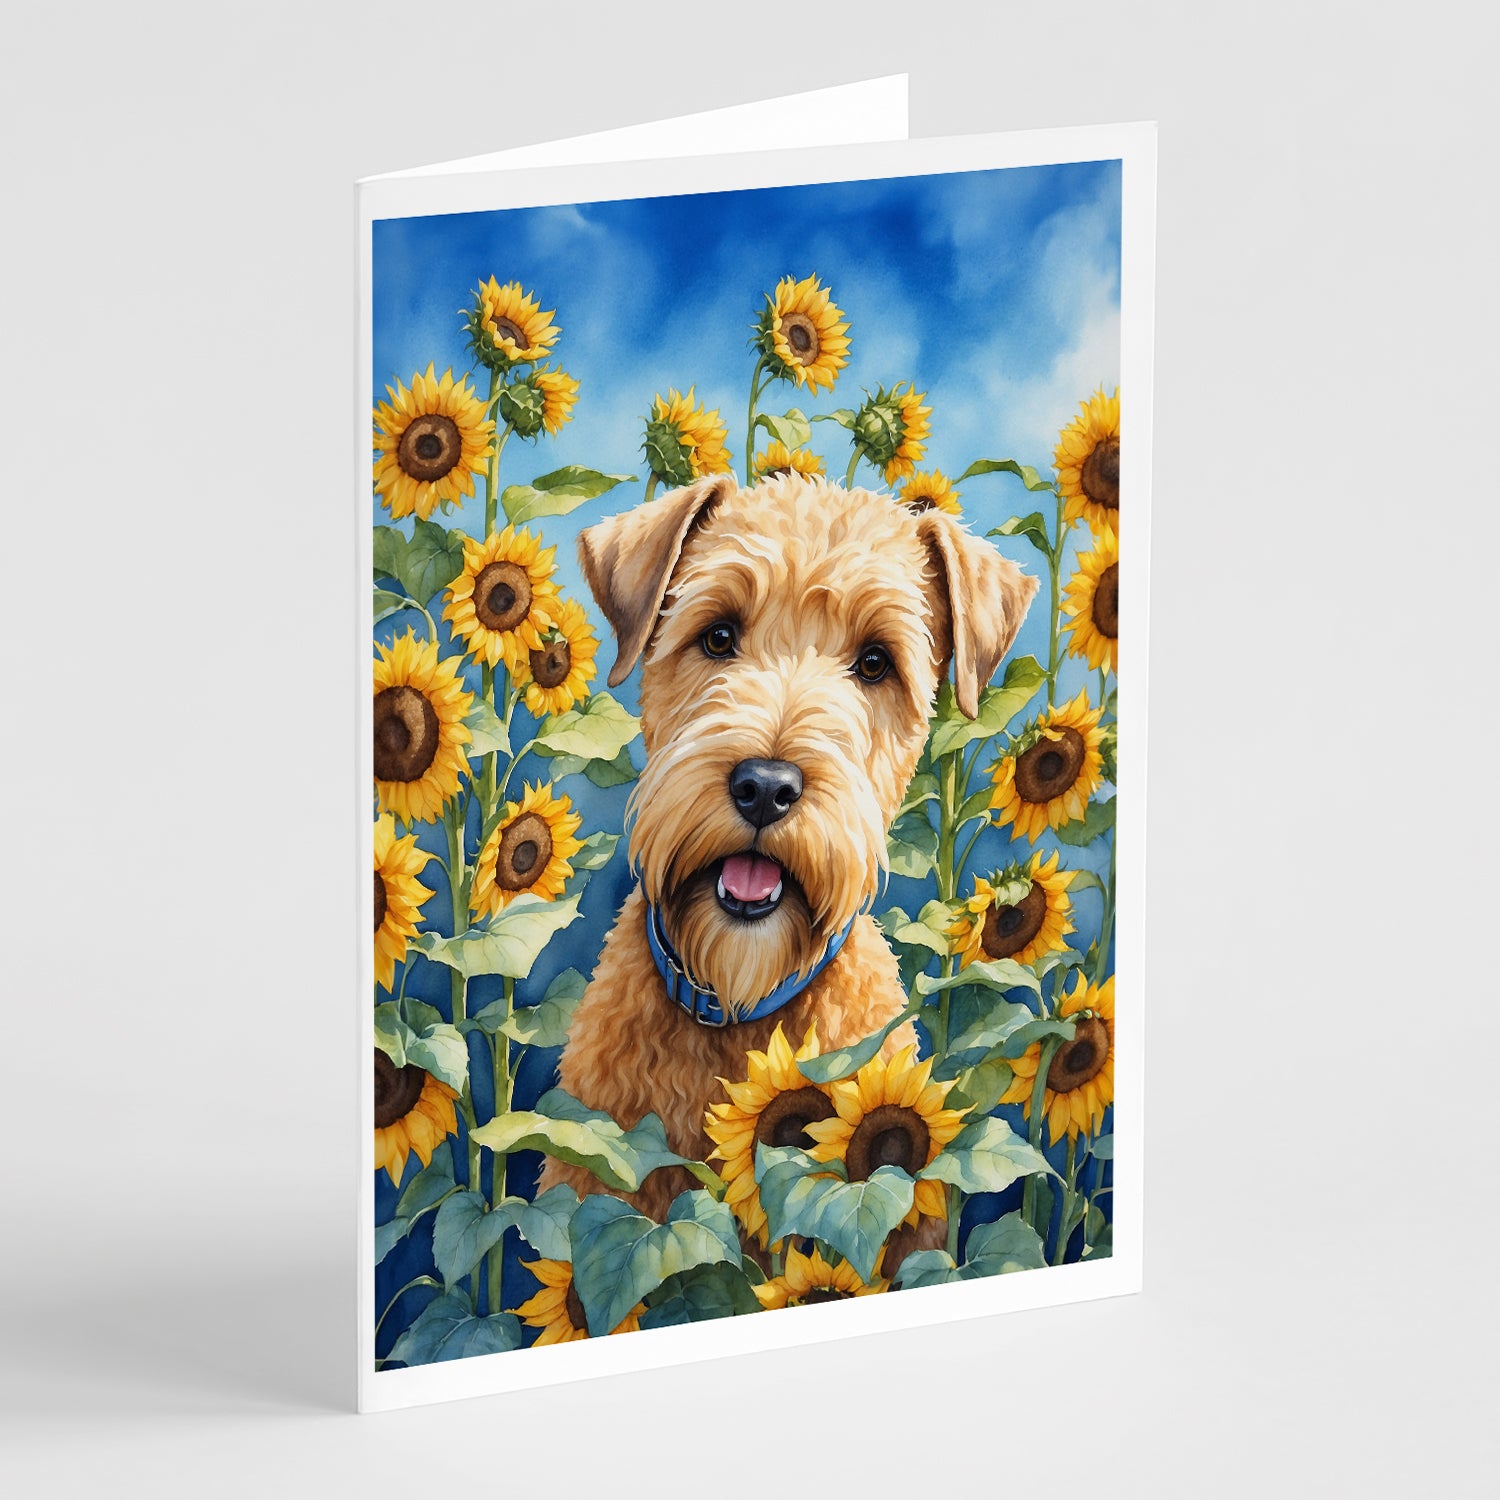 Buy this Wheaten Terrier in Sunflowers Greeting Cards Pack of 8